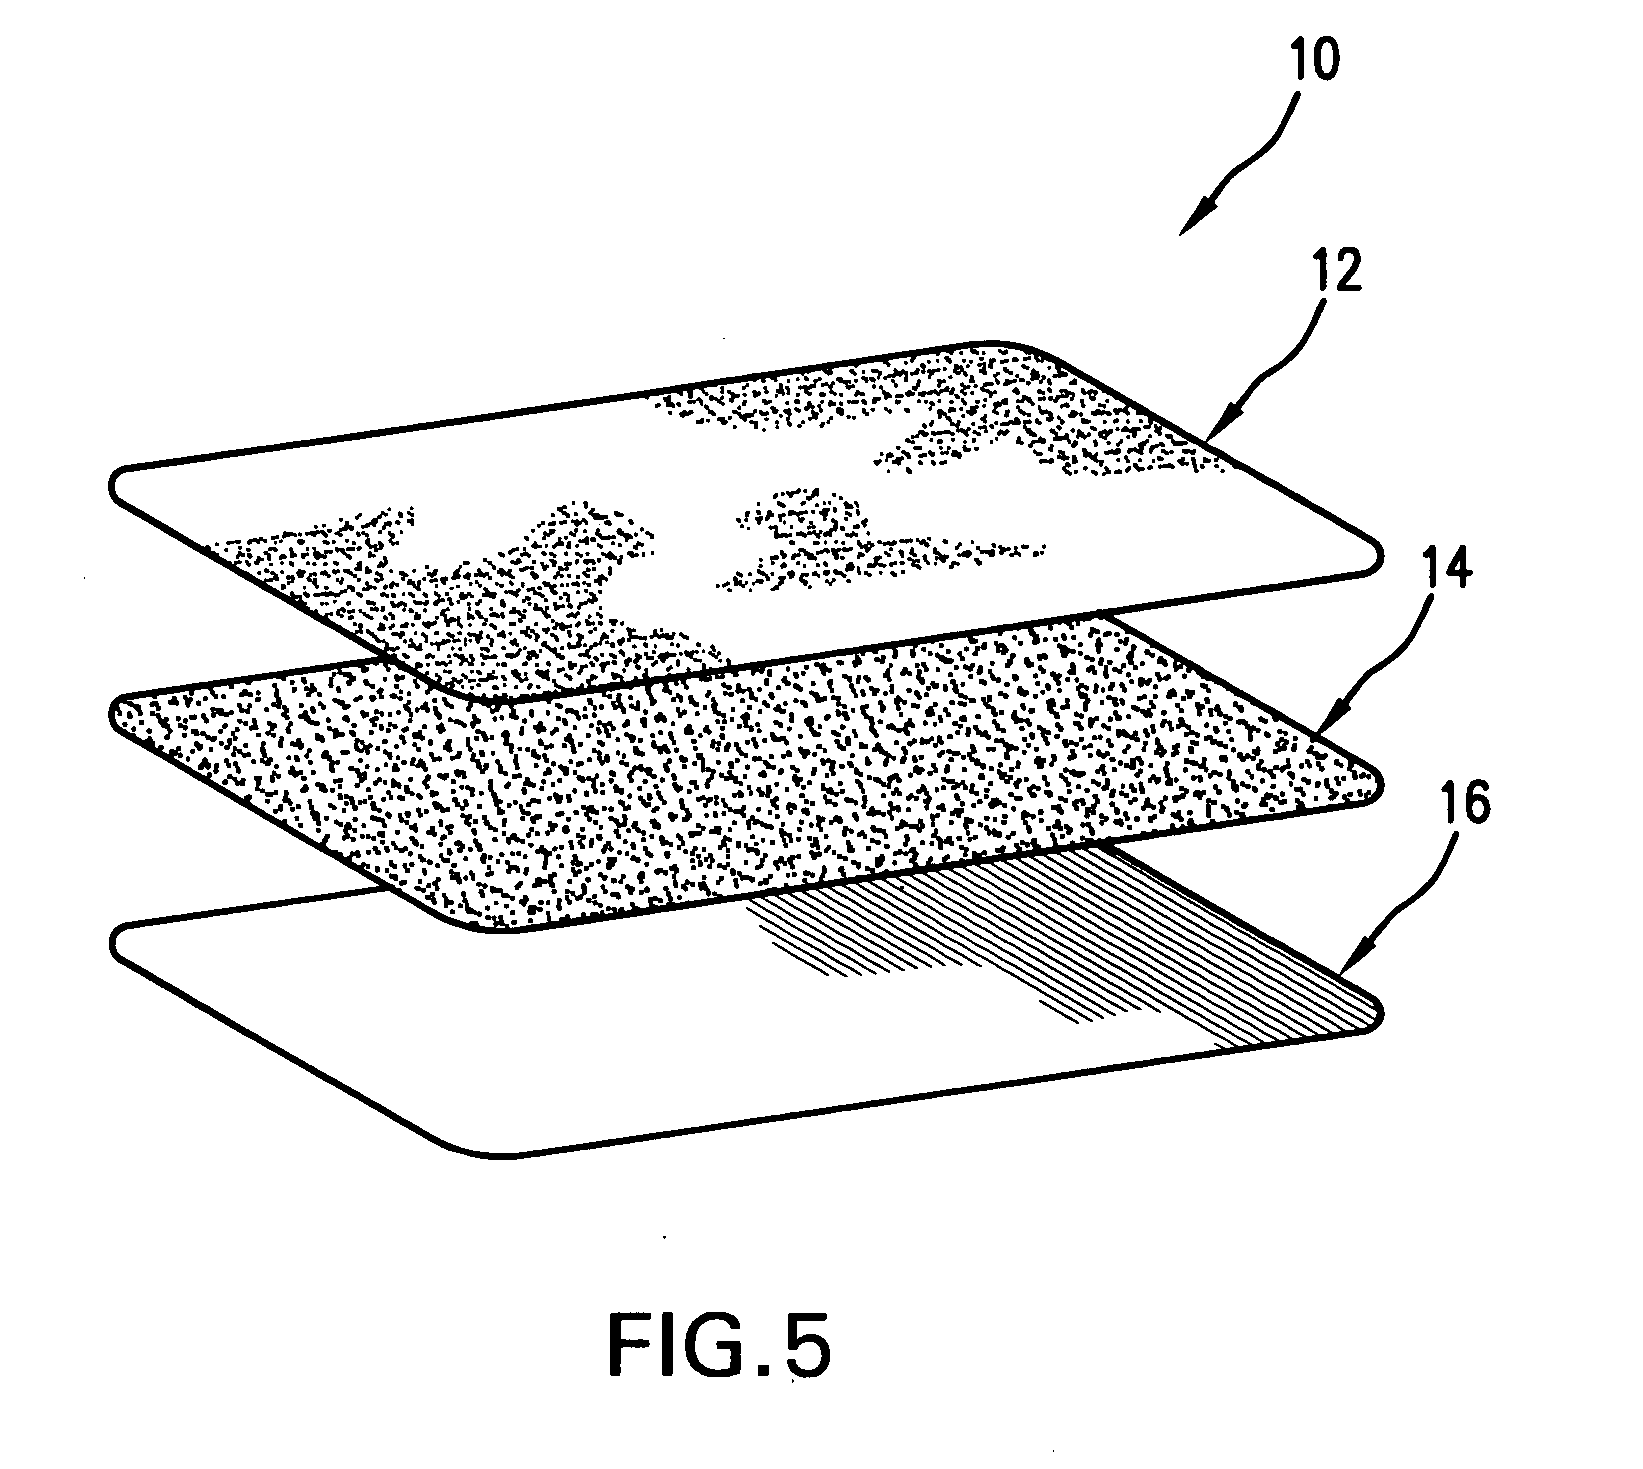 Self adhering fabric patch and moisture resistant flexible enclosure for containing the patch